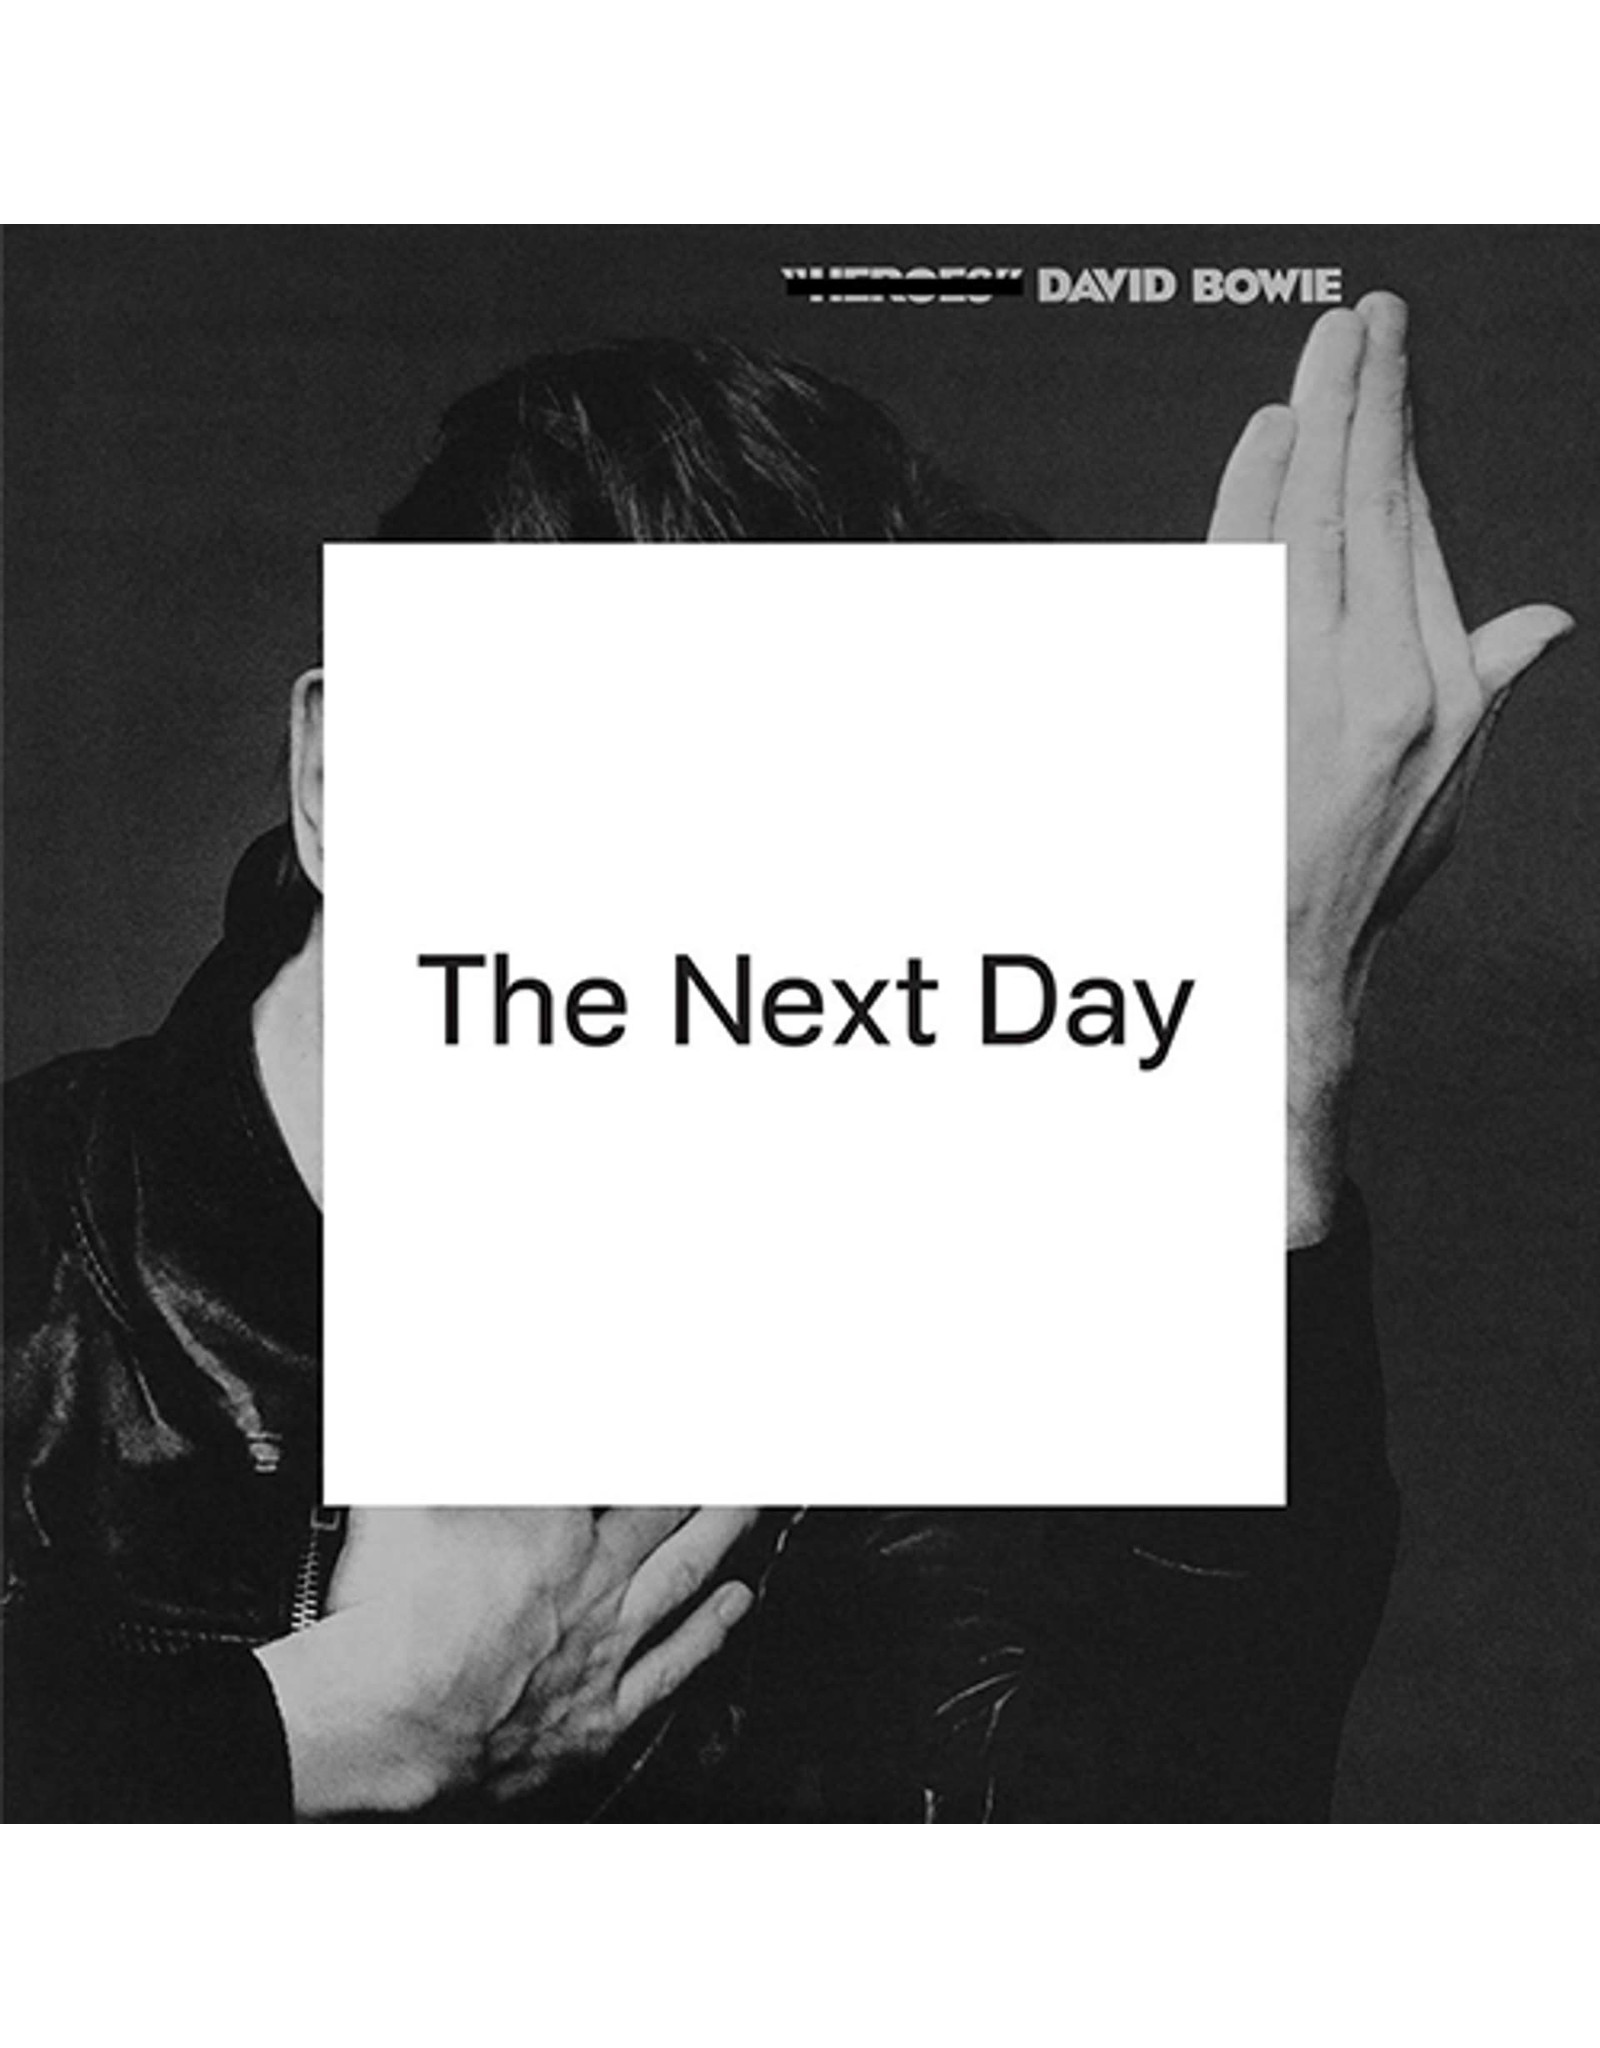 Columbia Bowie, David: The Next Day LP